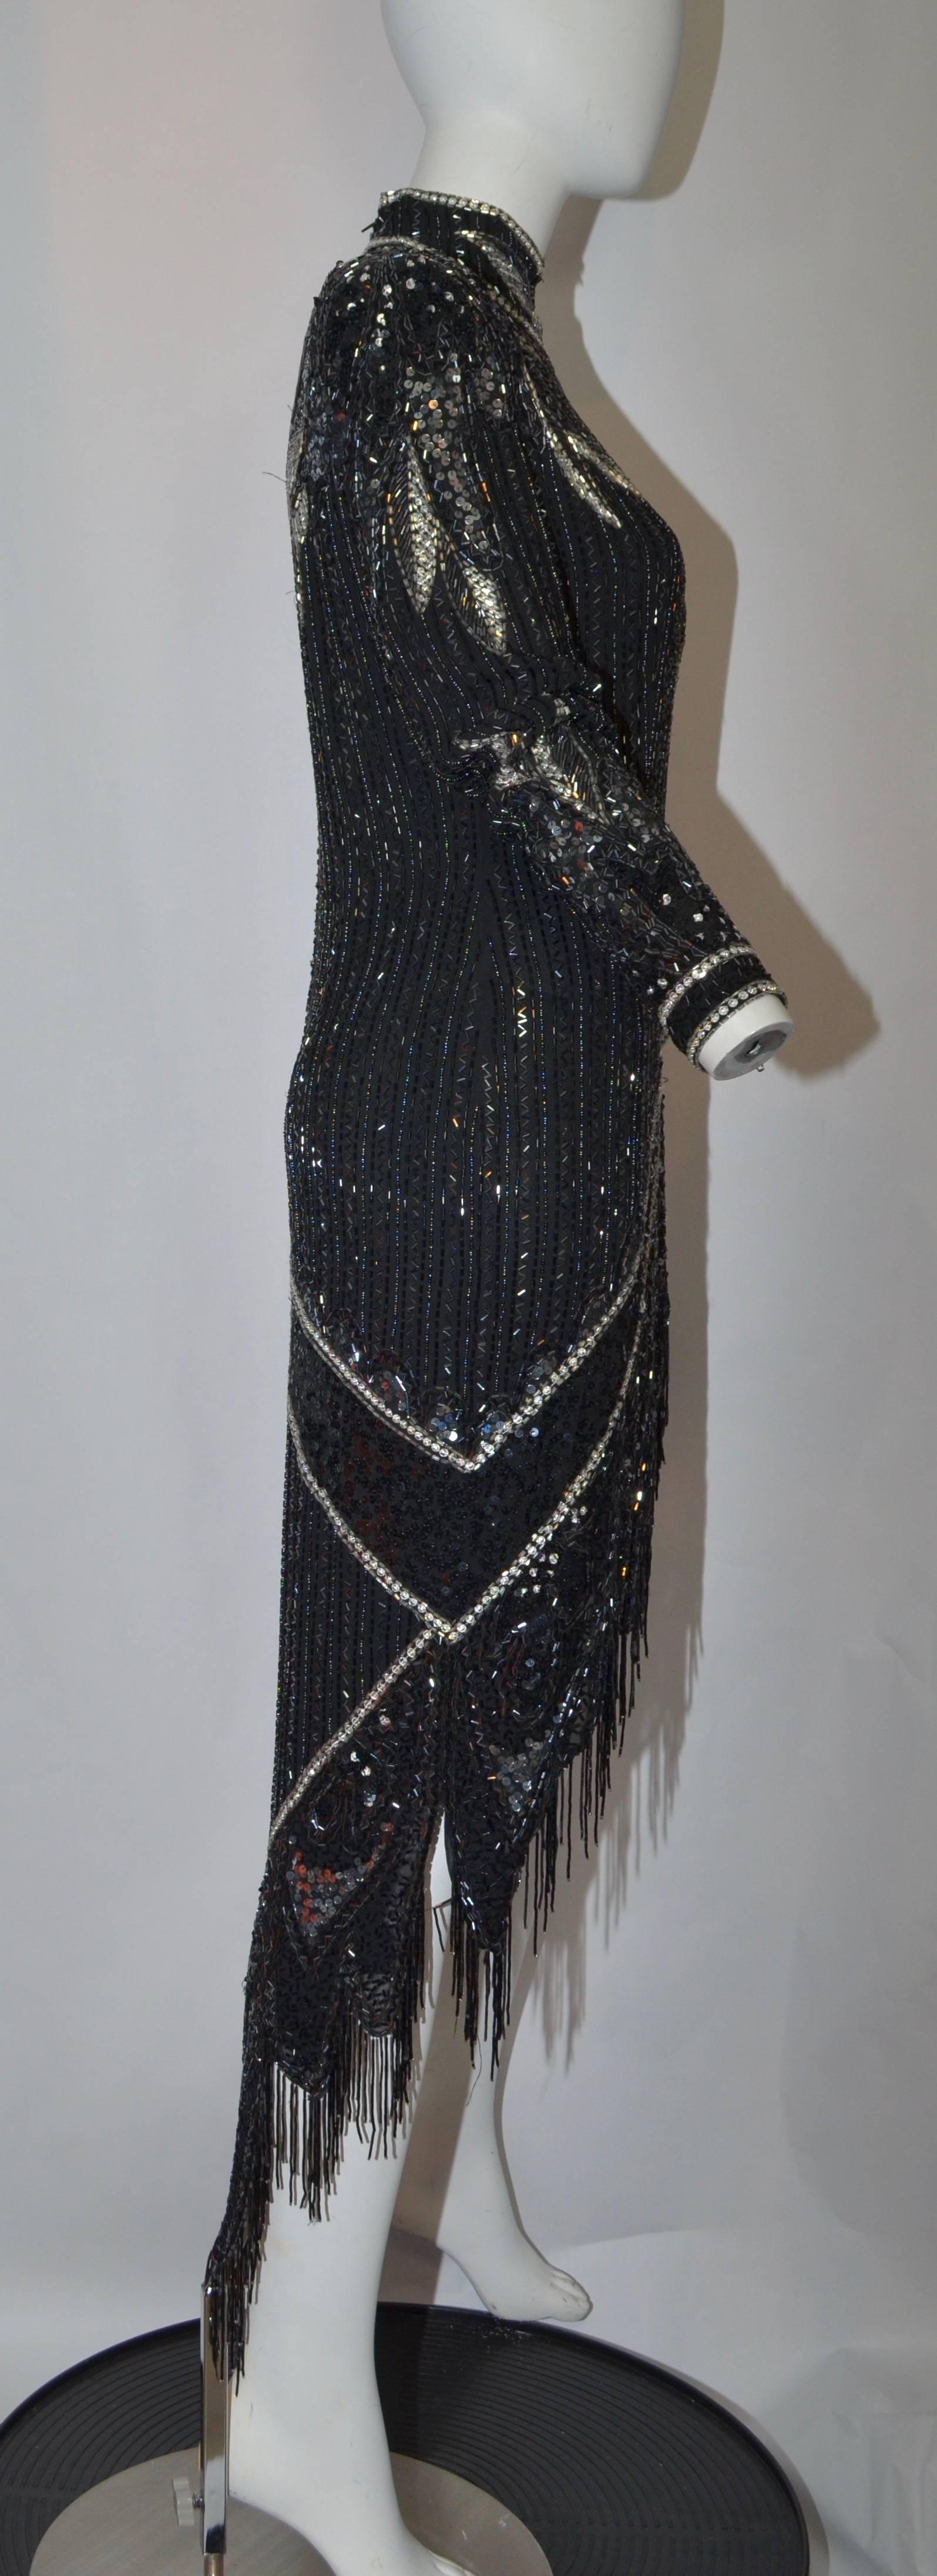 Exquisite Bob Mackie 1980's Silver and Black fringe beaded dress with hi-lo hem and 3 inch fringe on the lower hem and wrap portion of the front skirt of the dress. Lots of movement in the front due the the wrap skirt with layers of fringe. Silver